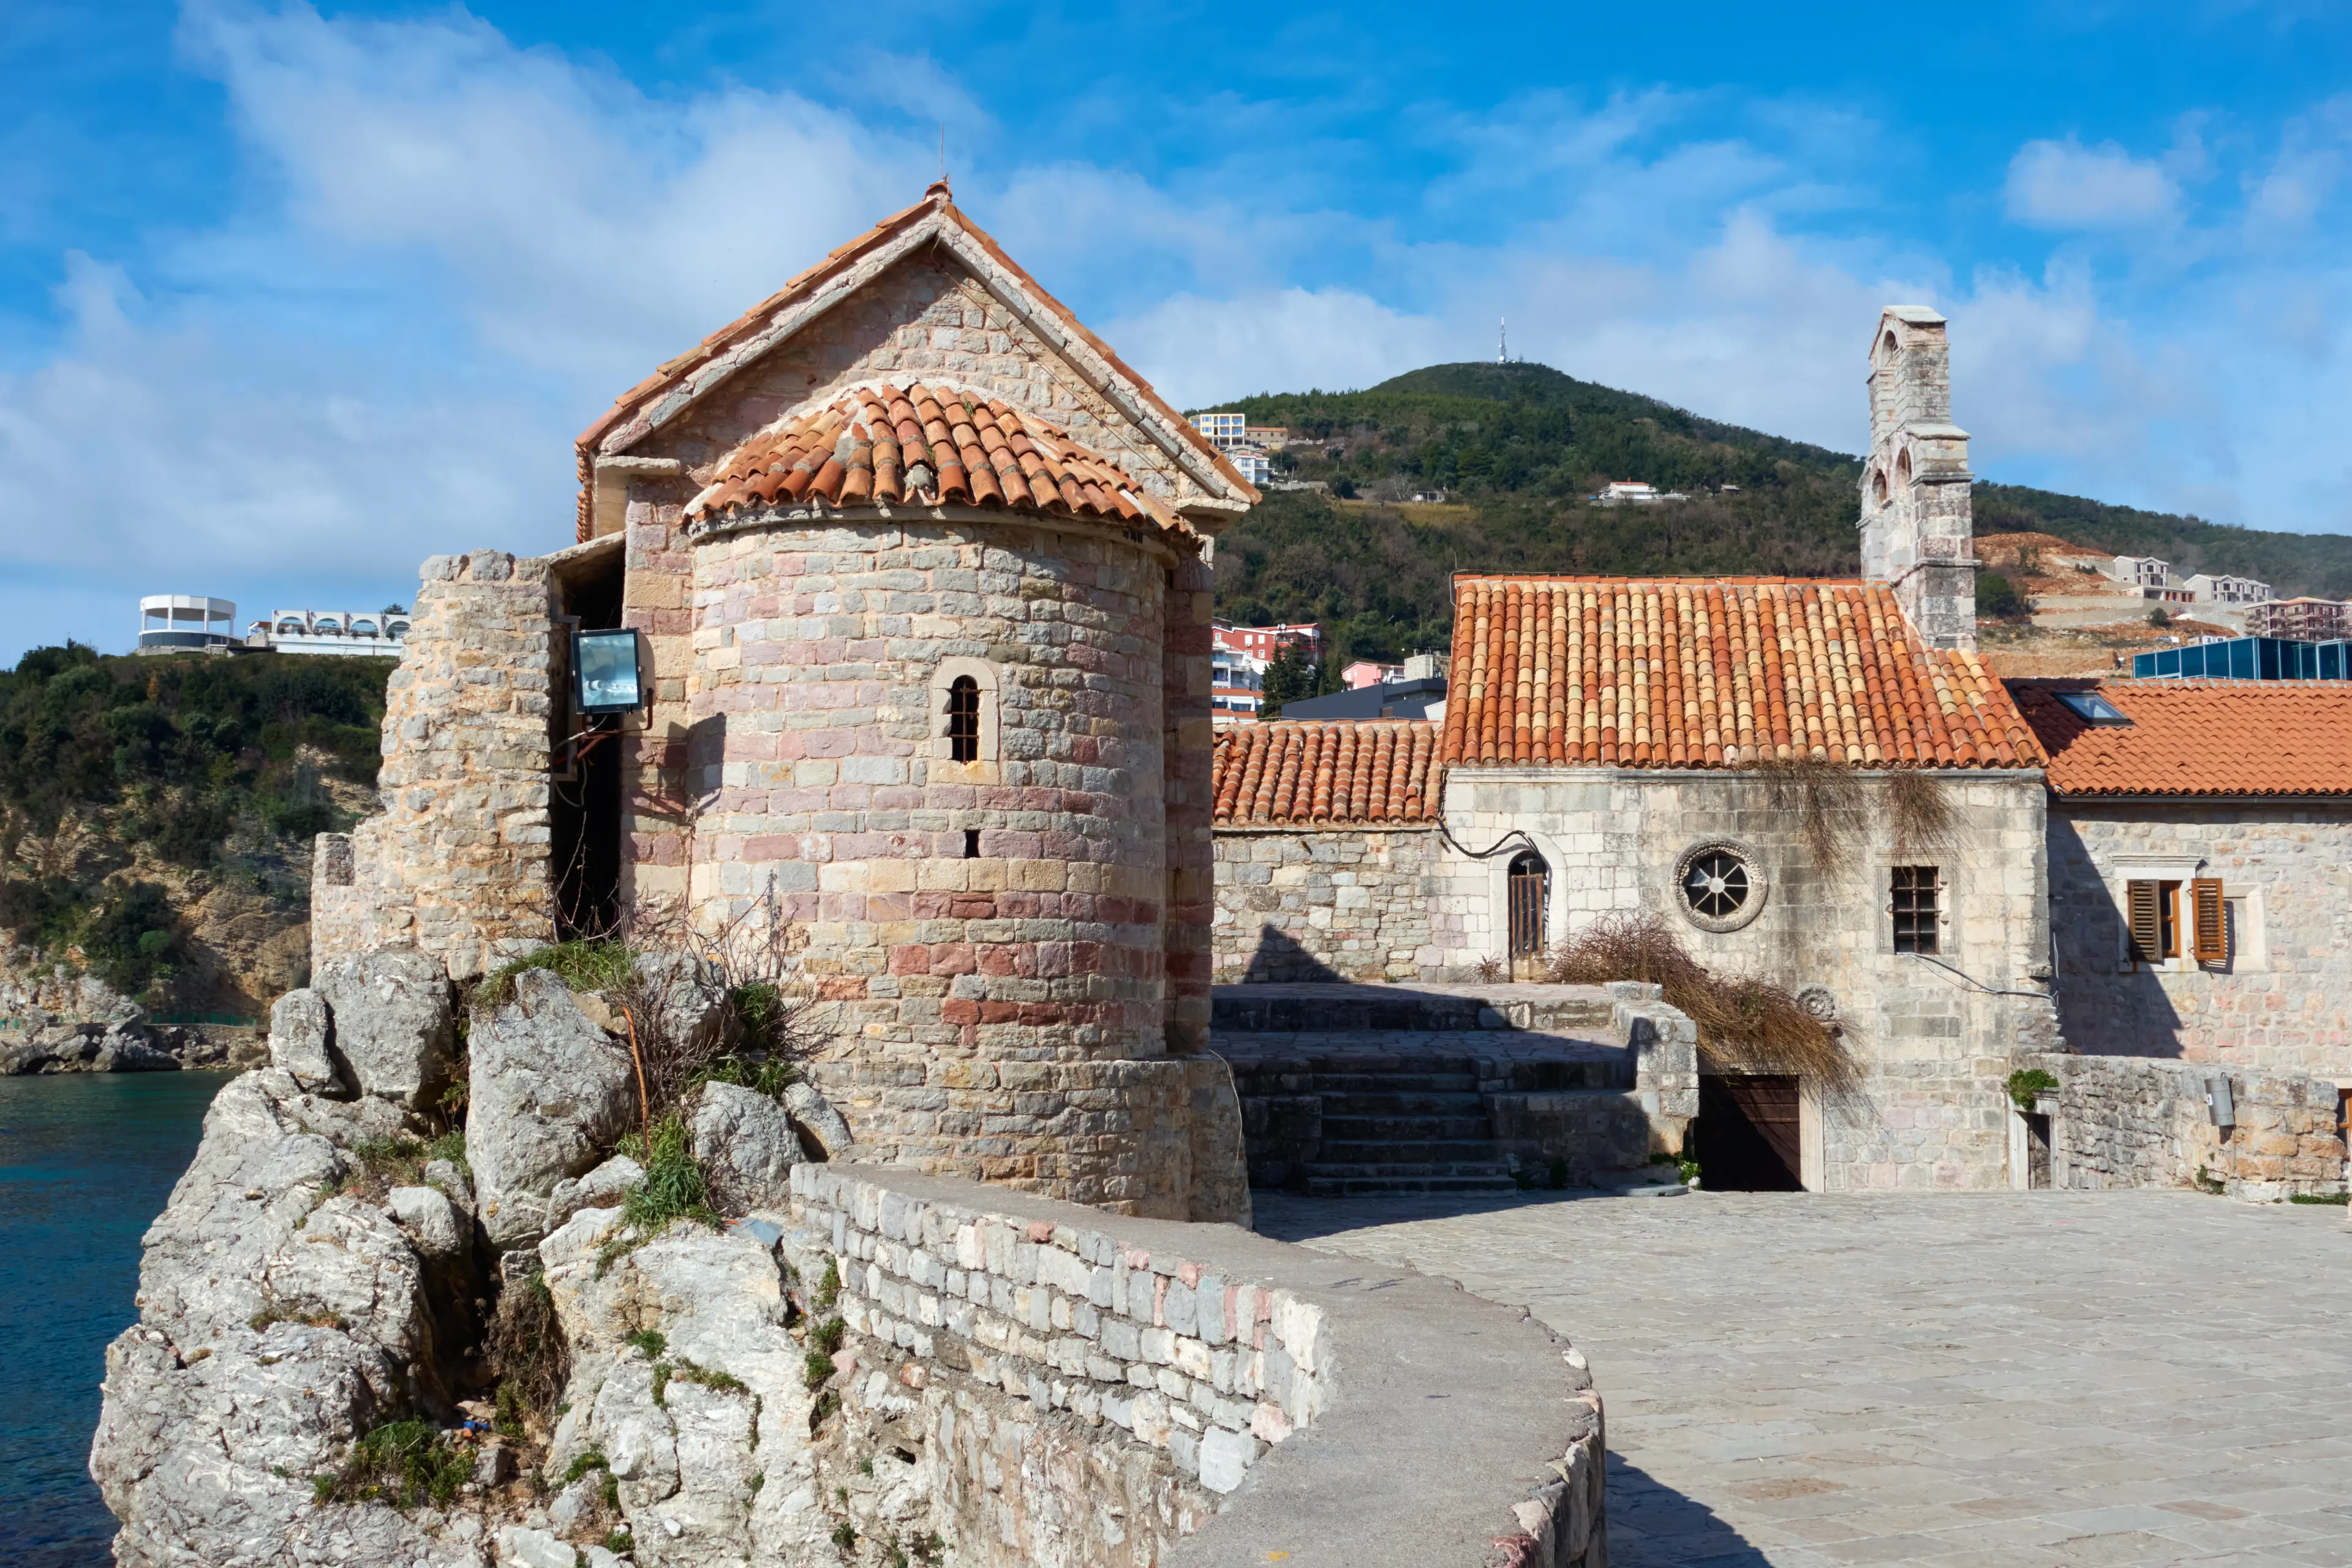 4-Day Solo Adventure: Outdoor and Sightseeing in Budva, Montenegro